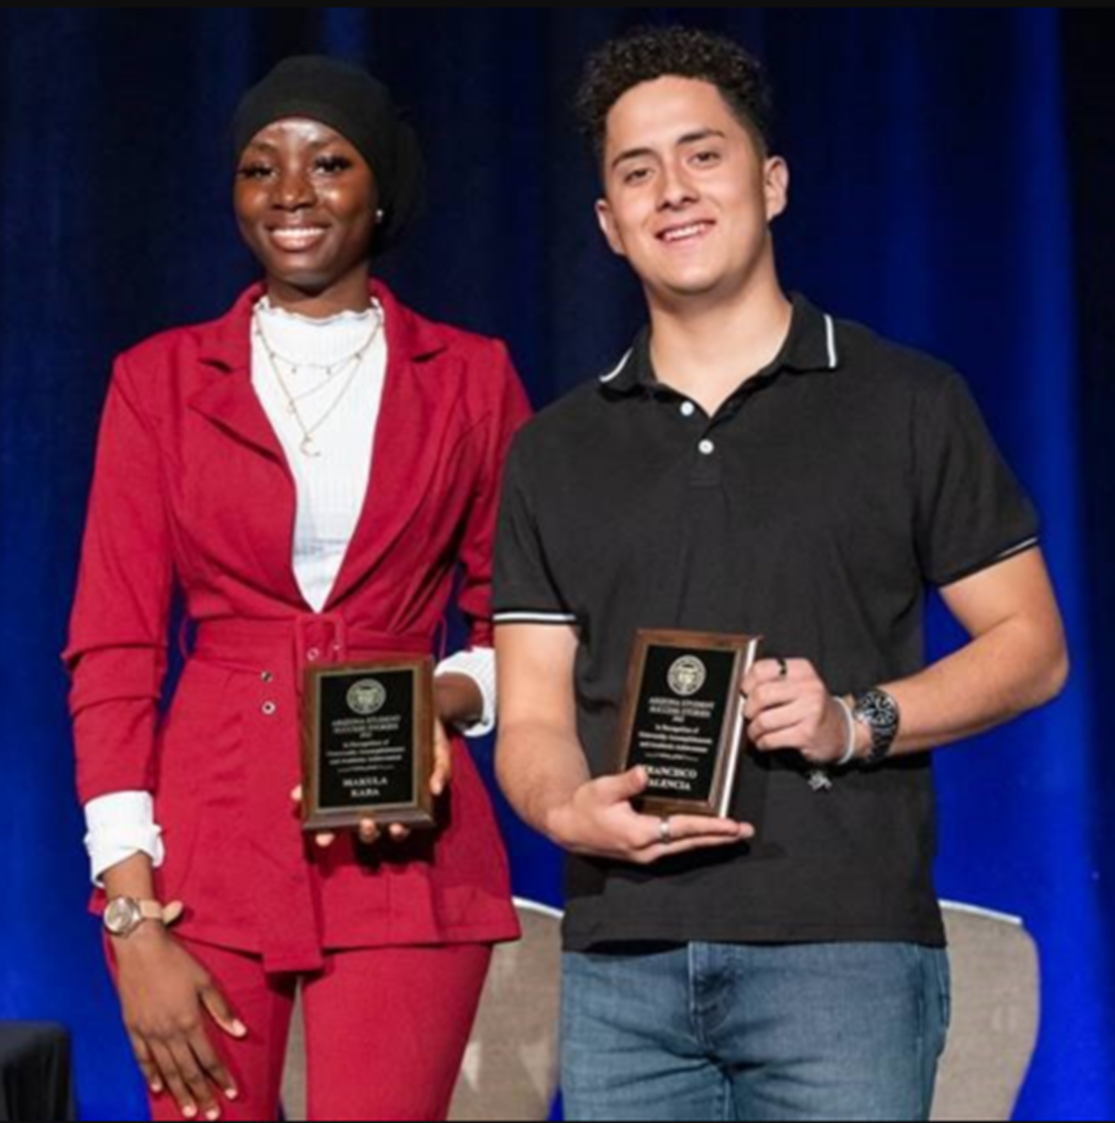 Makula Kaba and Francisco Valencia accept their awards at the Office of English Language Acquisition Services conference on December 9, 2022.